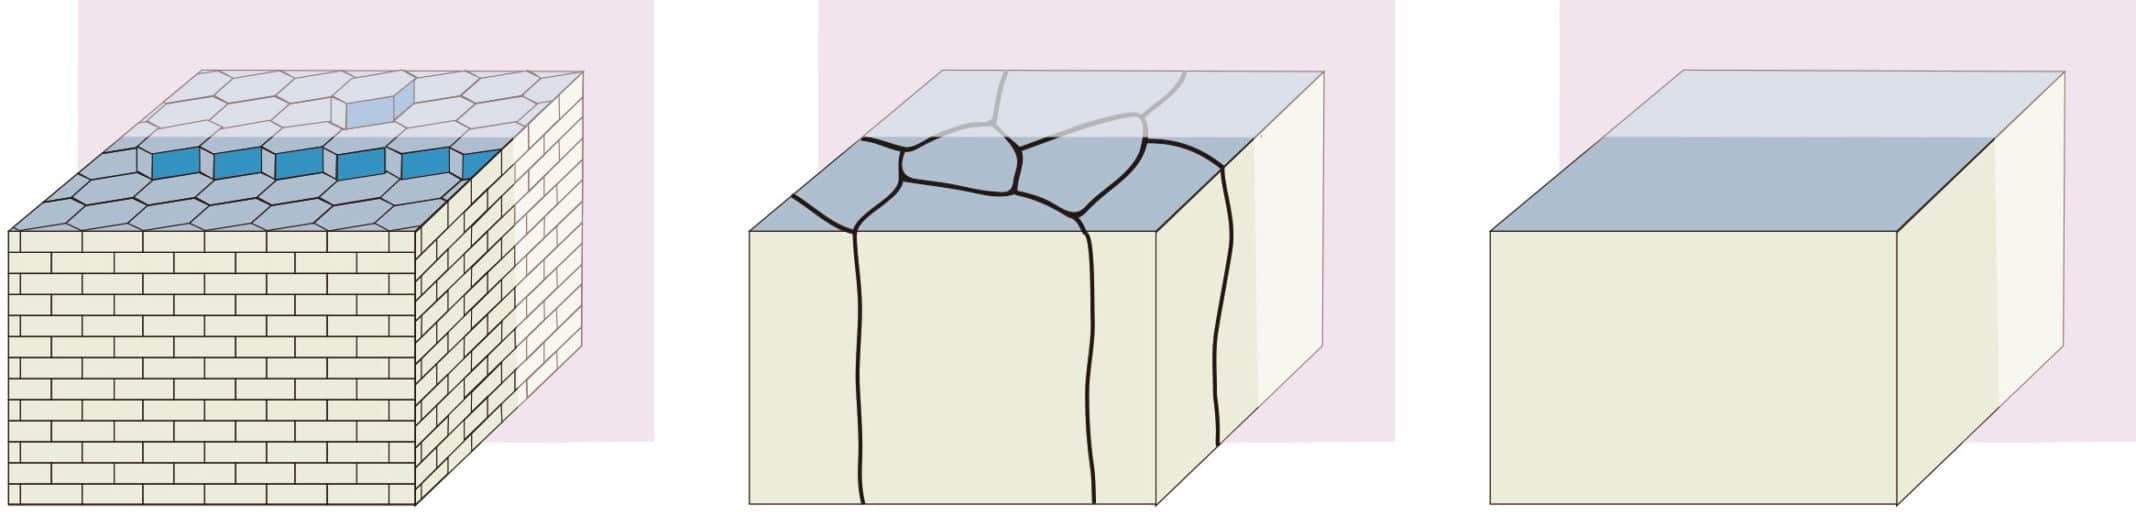 Artist’s renderings of the nanostructures of nacre (left), prismatic calcite (center) and monolithic aragonite (right). The outside of fan mussel shells are made mainly of prismatic calcite, while nacre is made up mainly of aragonite. Image credit: Hovden Lab